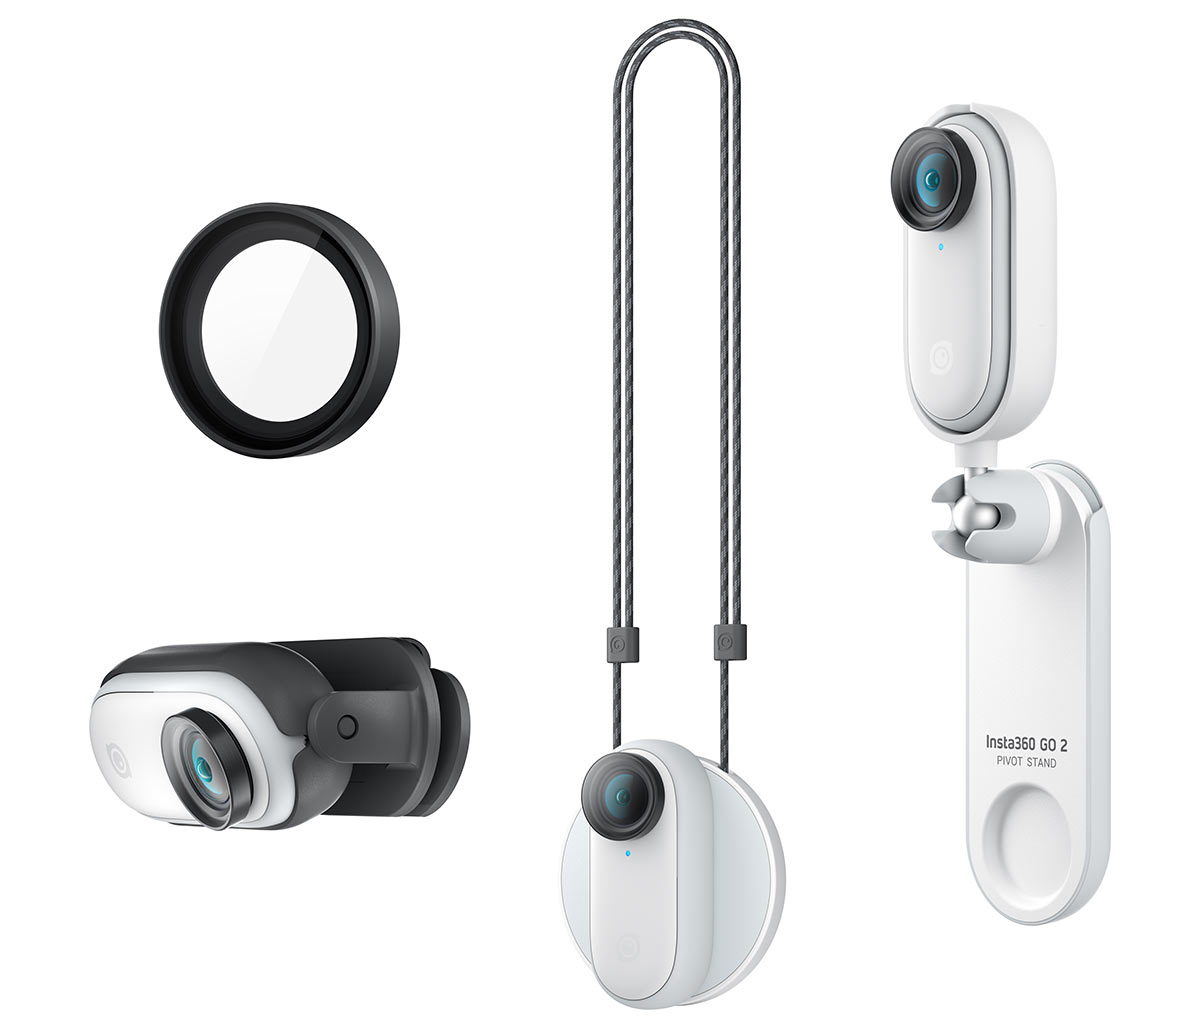 insta360 GO 2 miniature action camera accessories and charging case that are included with purchase